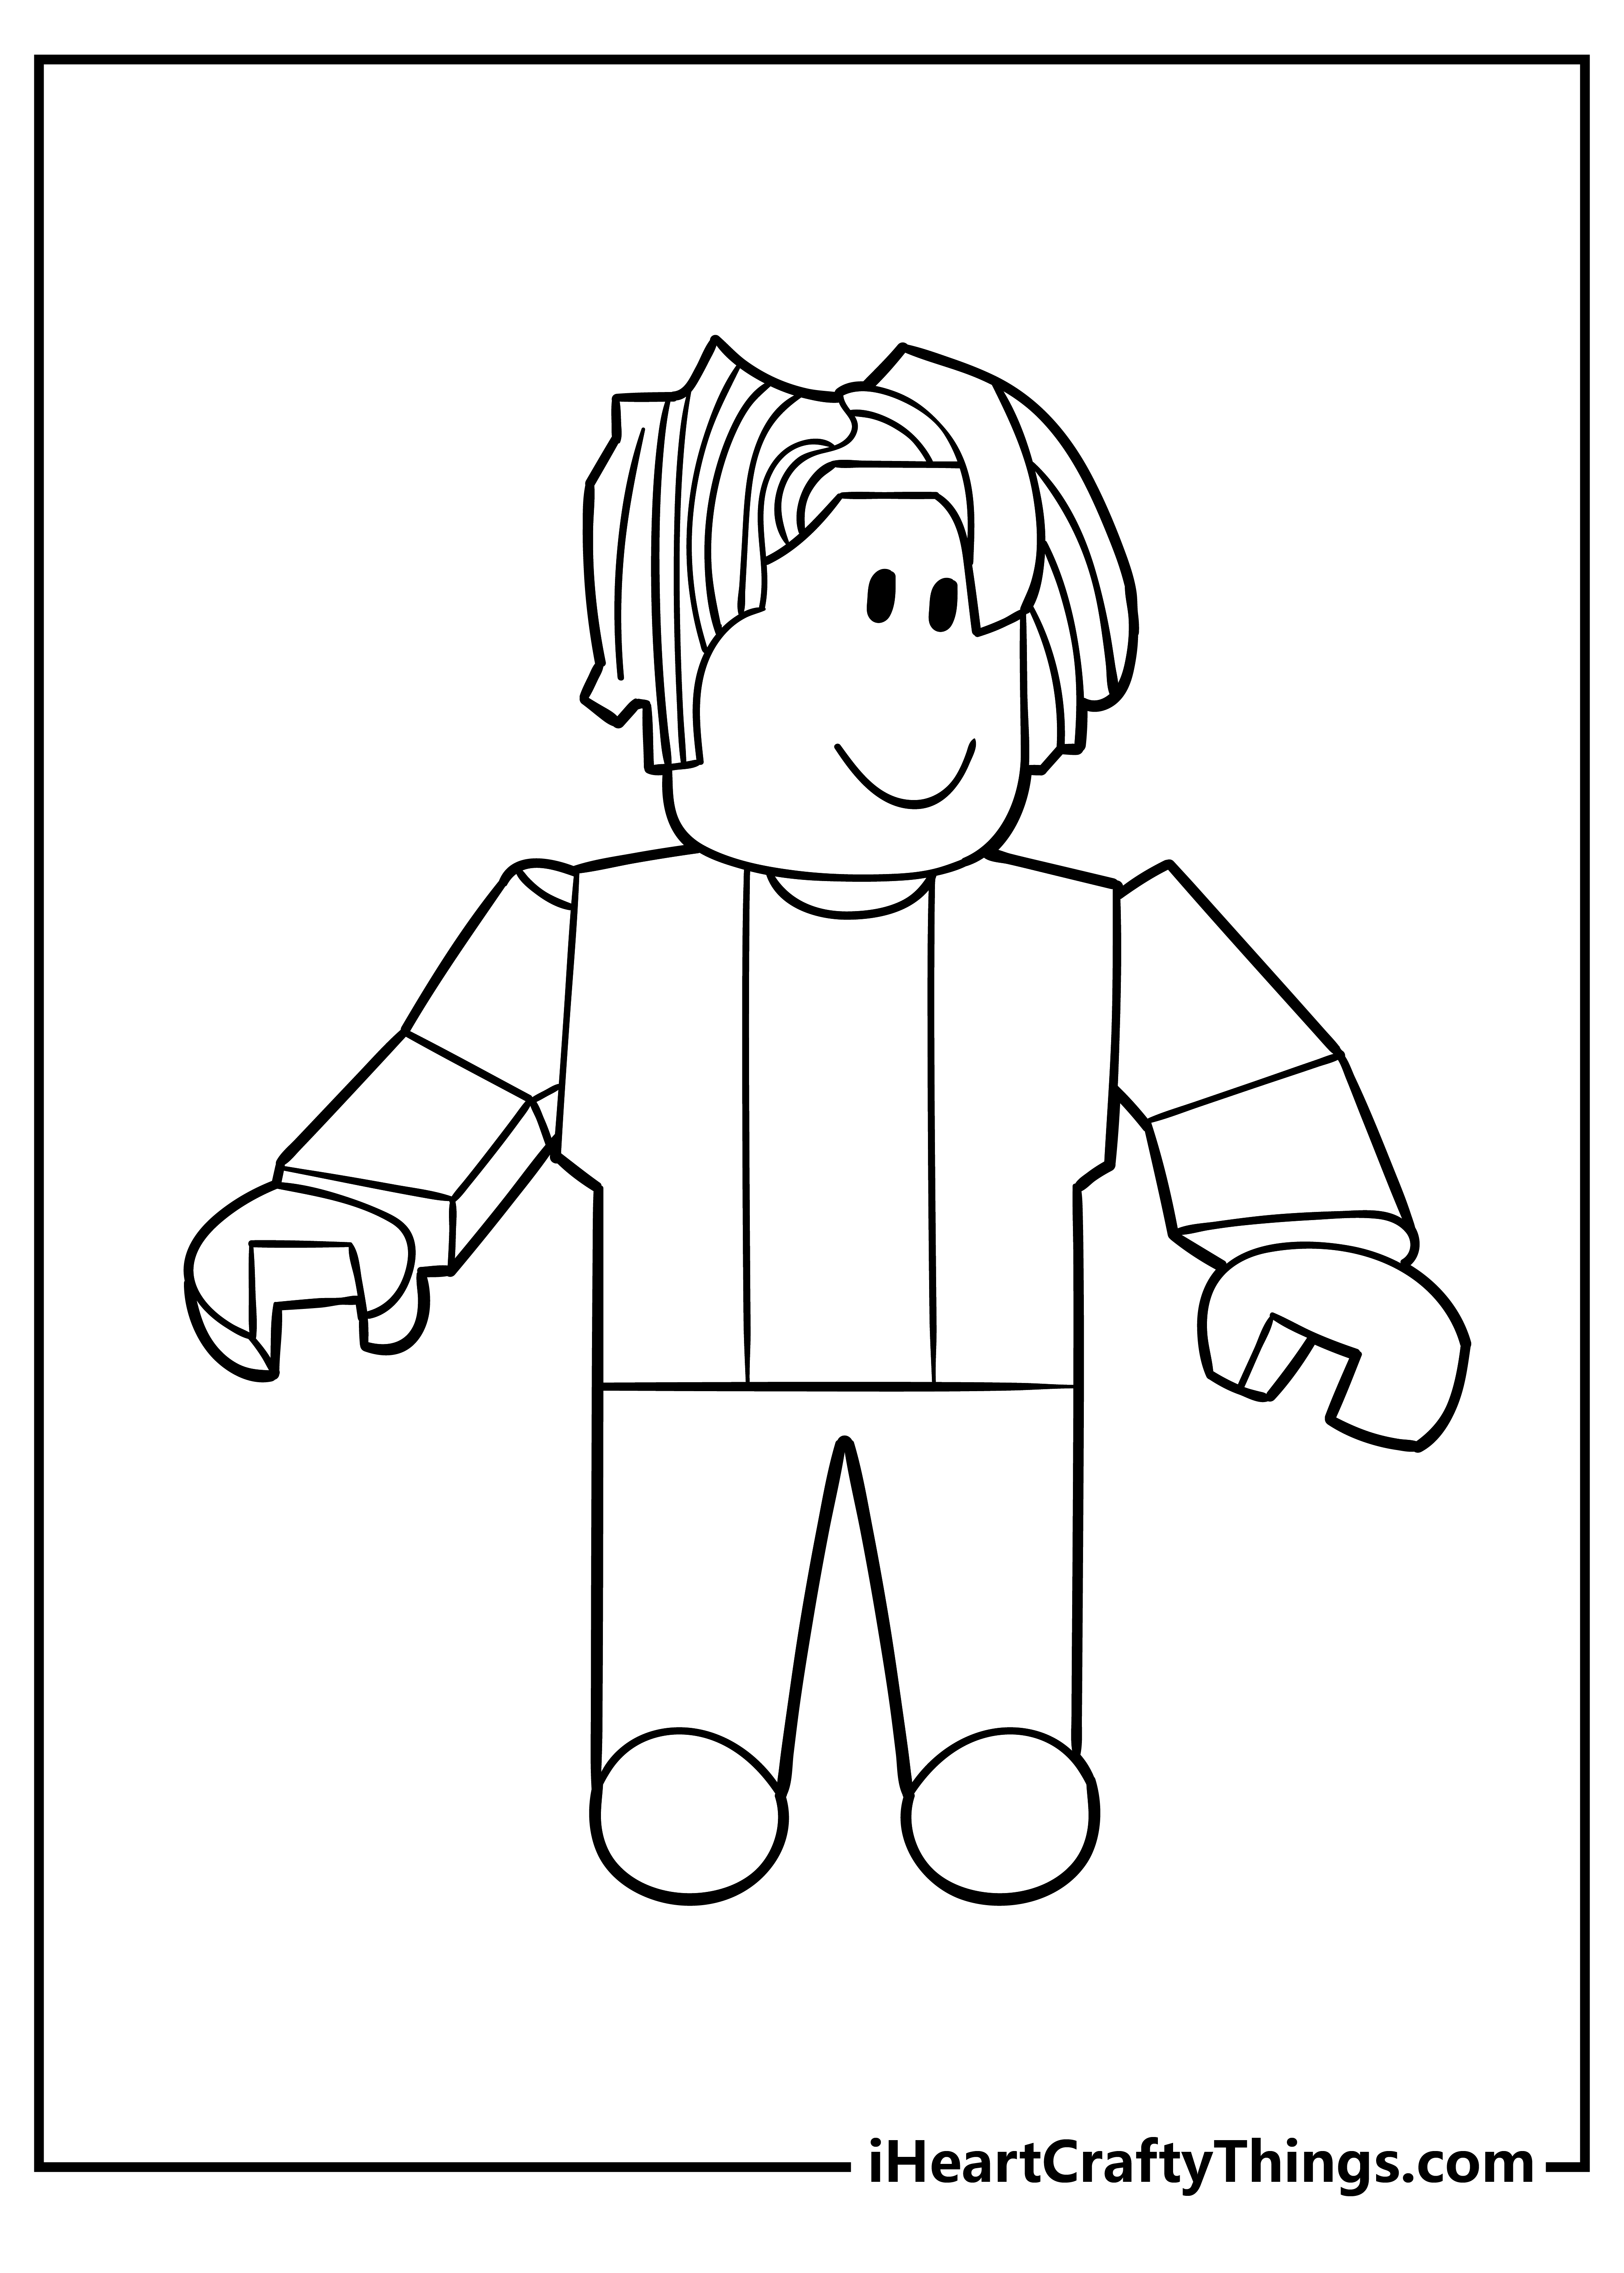 Roblox Coloring Pages free pdf download